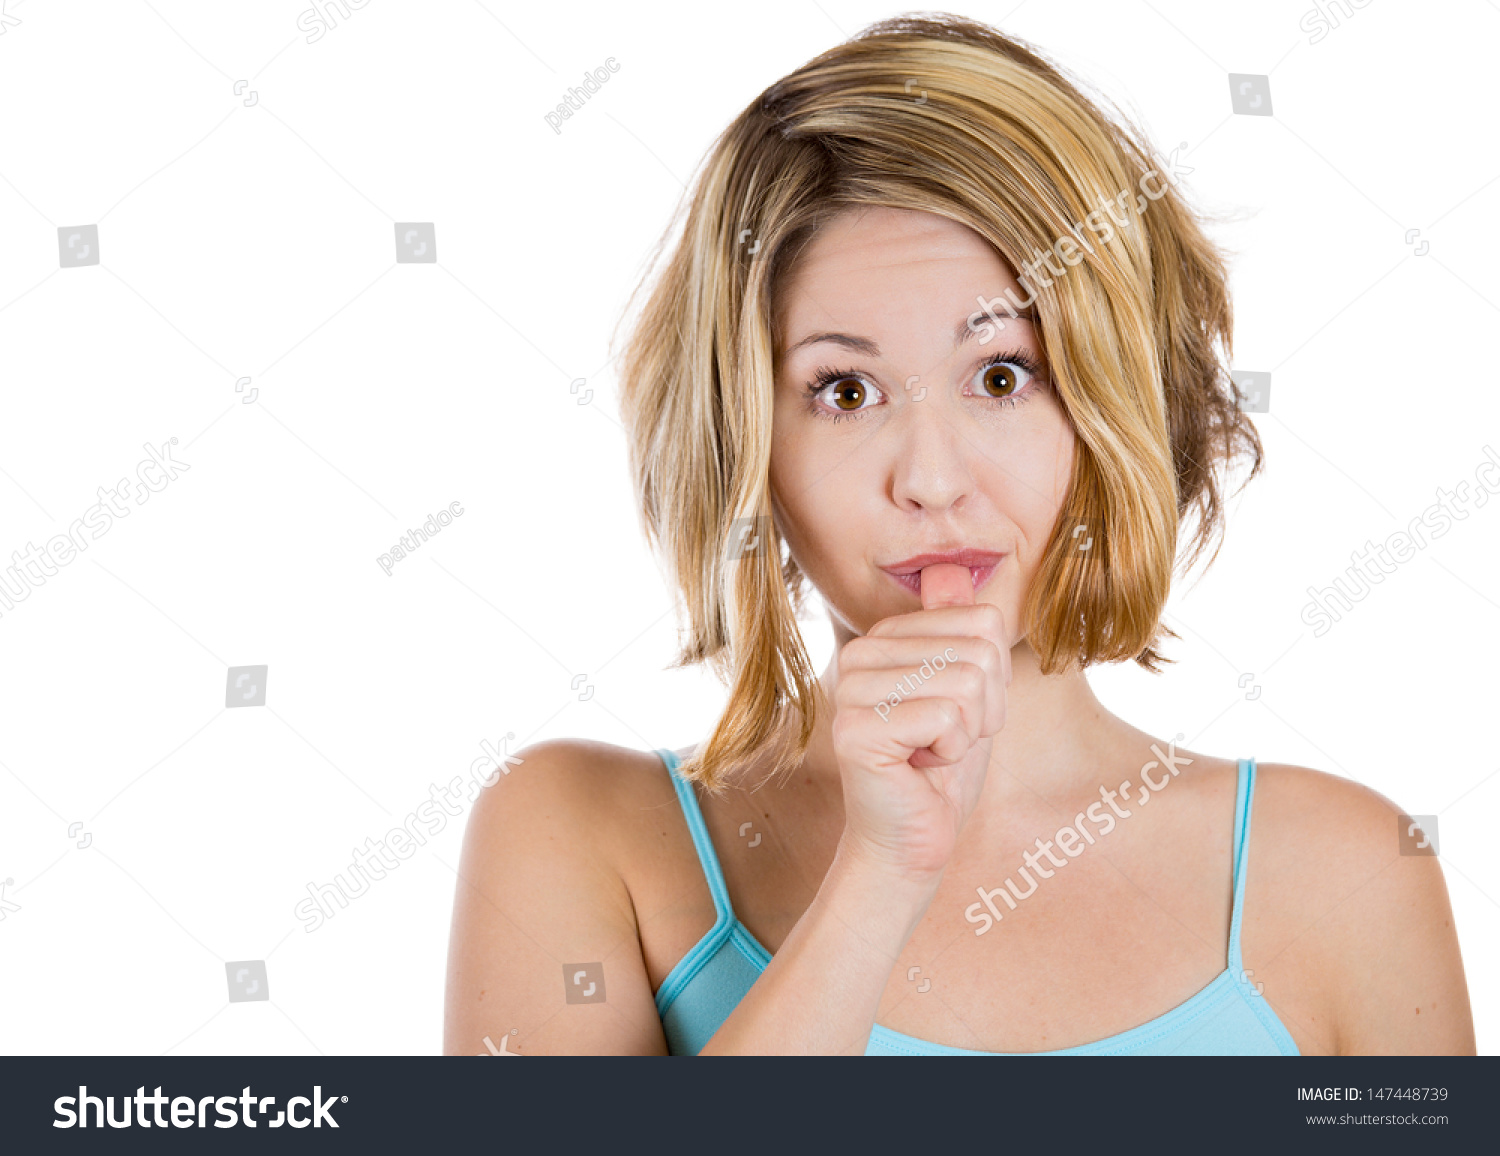 Closeup Portrait Of Woman With Finger In Mouth Sucking Thumb Or Biting Fingernail In Anxiety